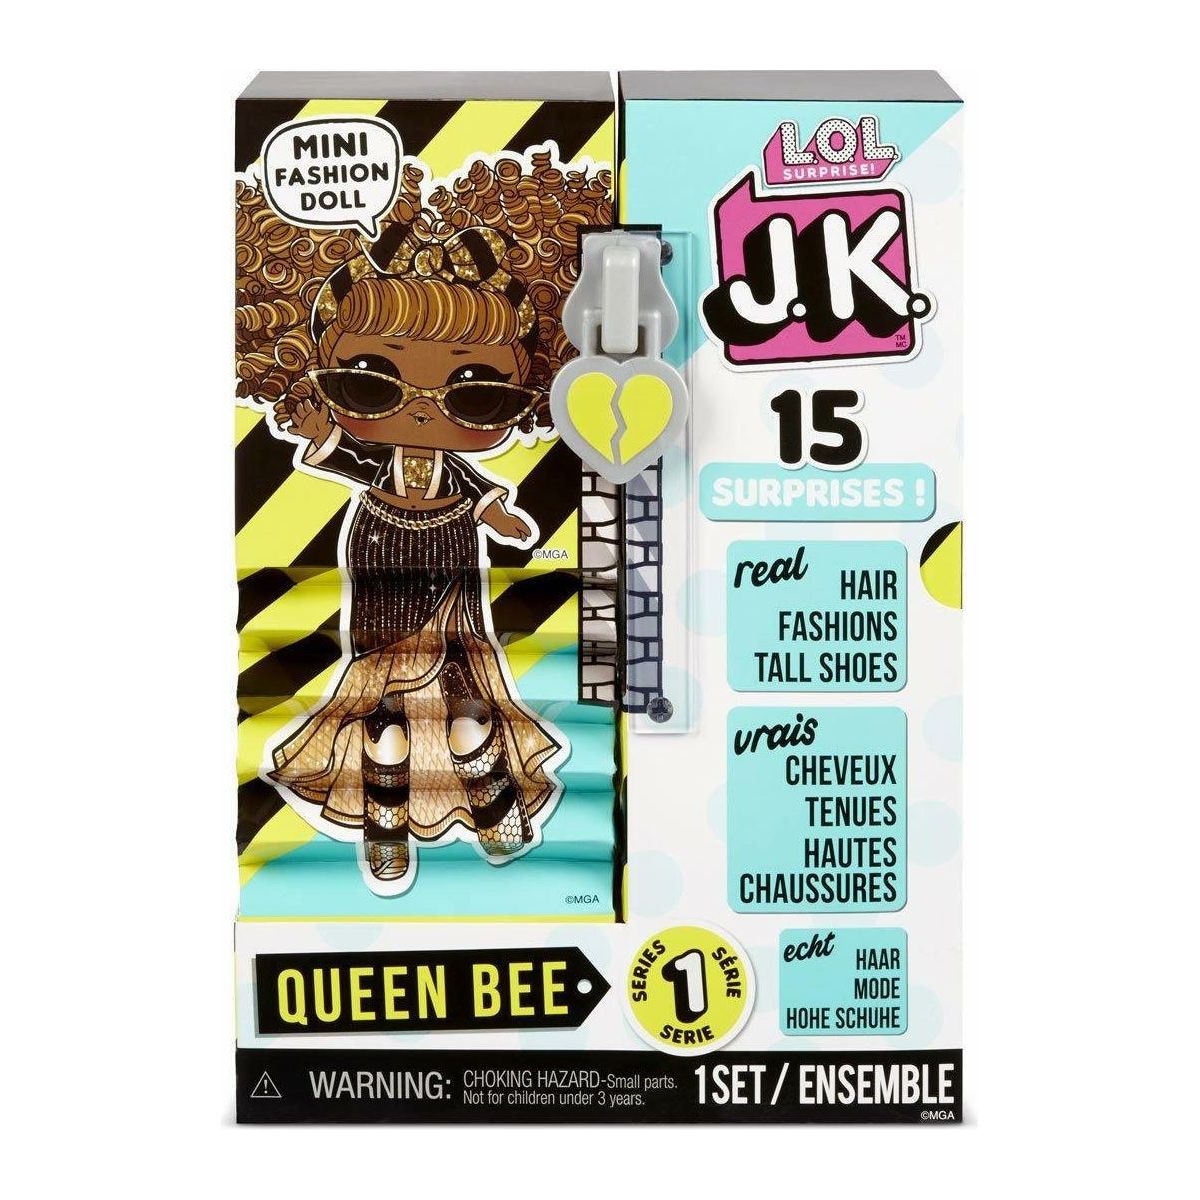 L.O.L Surprise JK Queen Bee Mini Fashion Doll With 15 Surprises - BumbleToys - 5-7 Years, Arabic Triangle Trading, Dolls, Fashion Dolls & Accessories, Girls, L.O.L